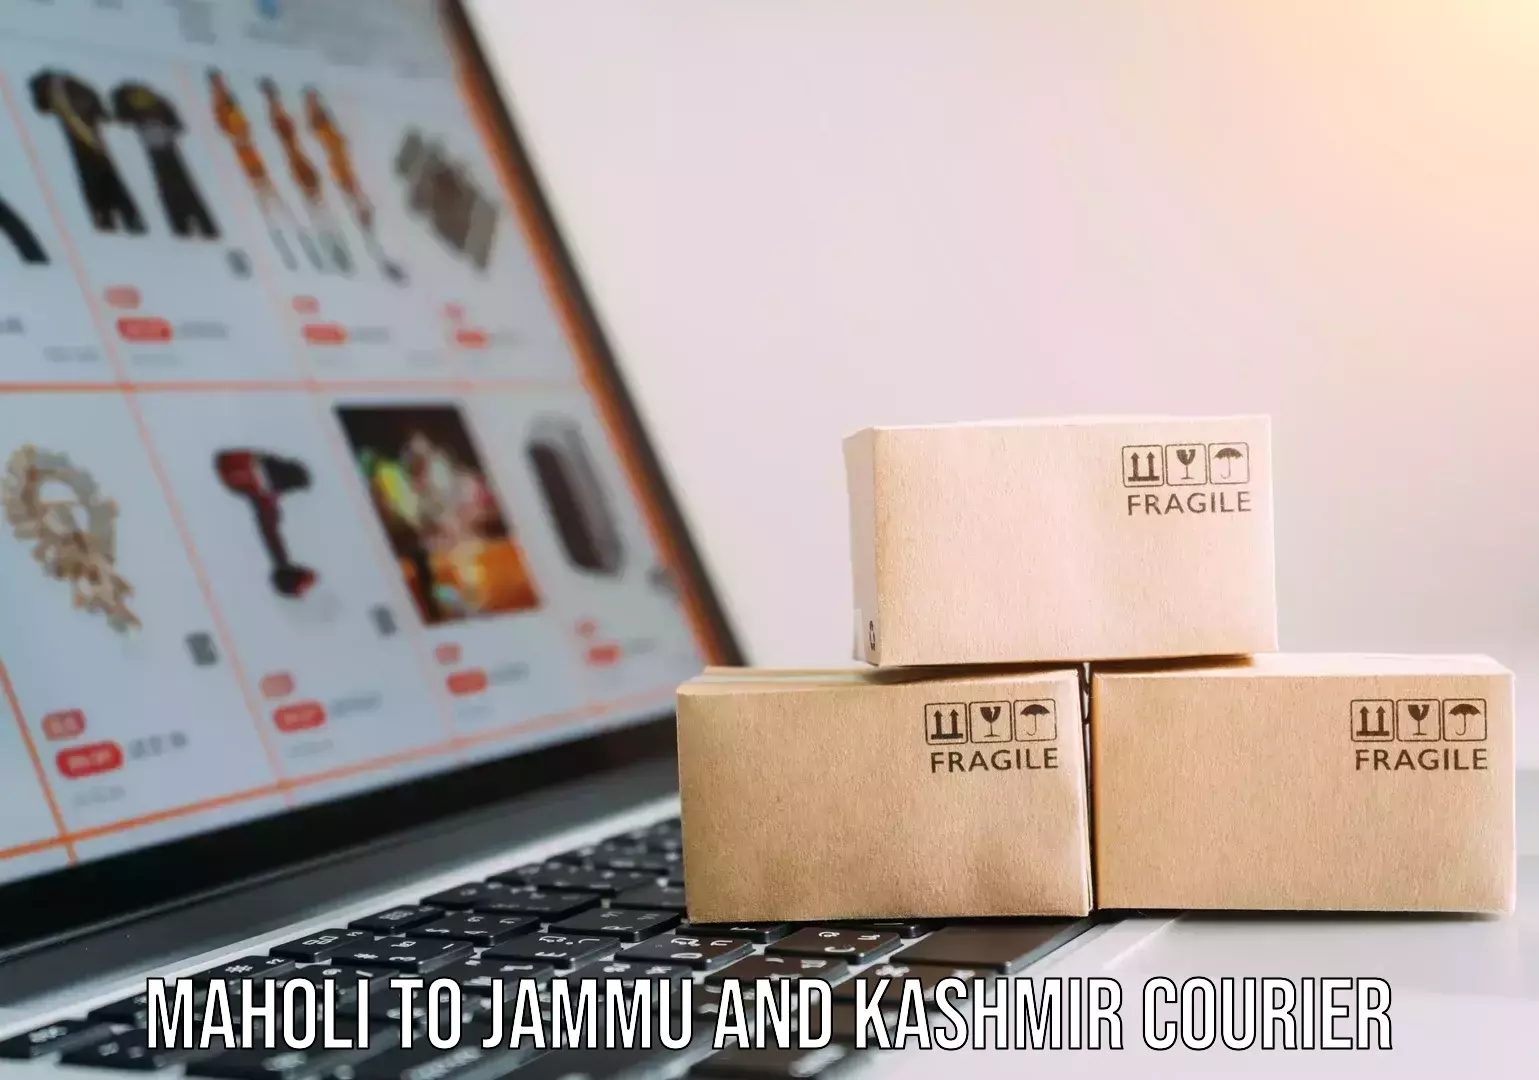 Trusted relocation experts Maholi to Jammu and Kashmir